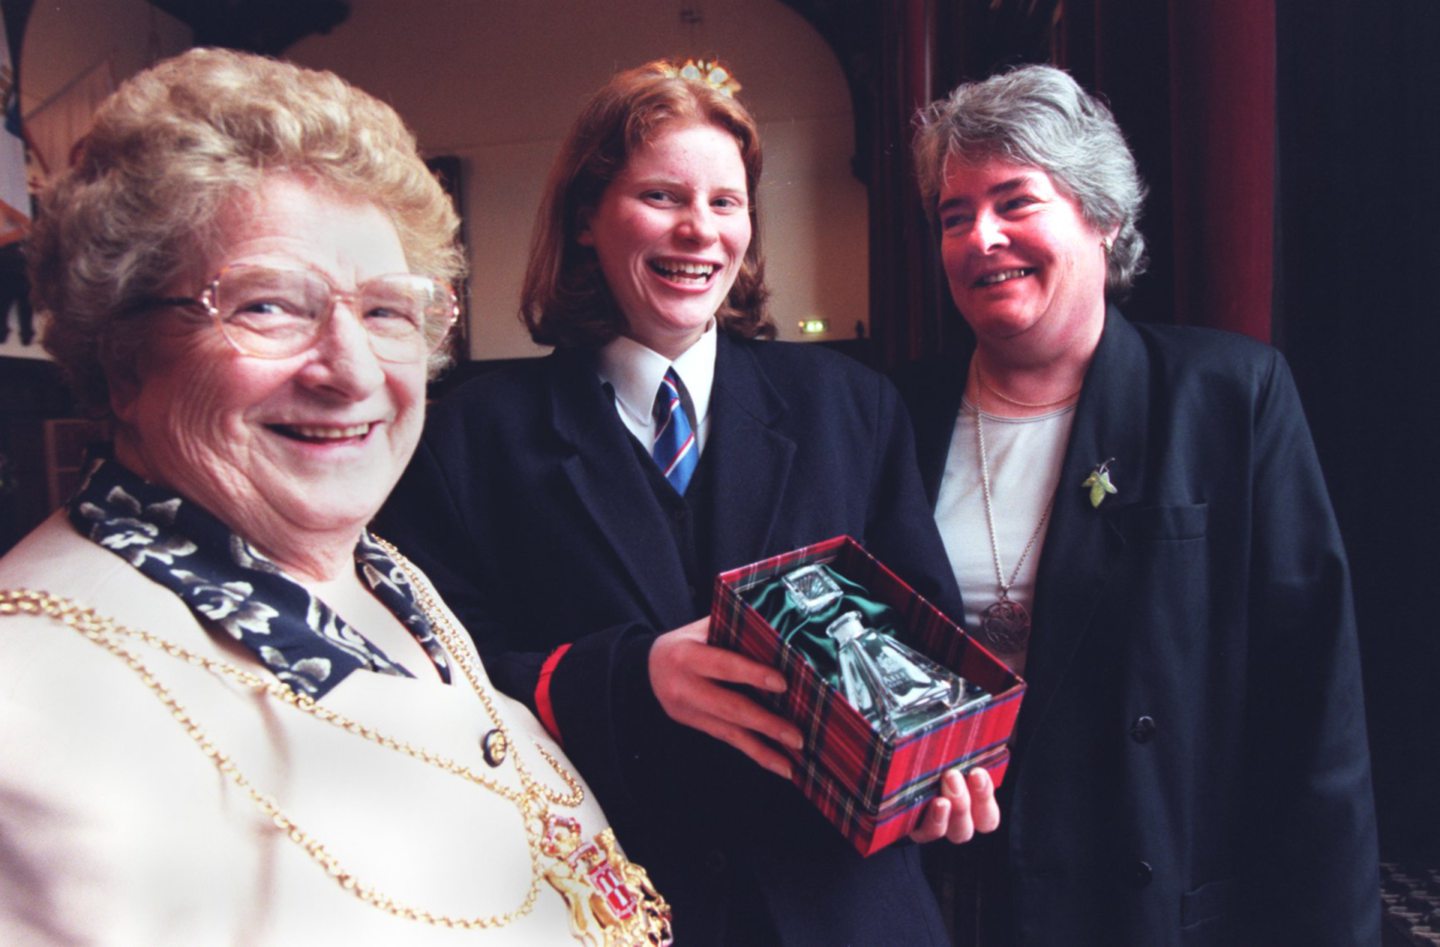  The Lord Provost Margaret Farquhar with 17-year-old Aberdeen Grammar School pupil, Caroline Smith, in 1999.